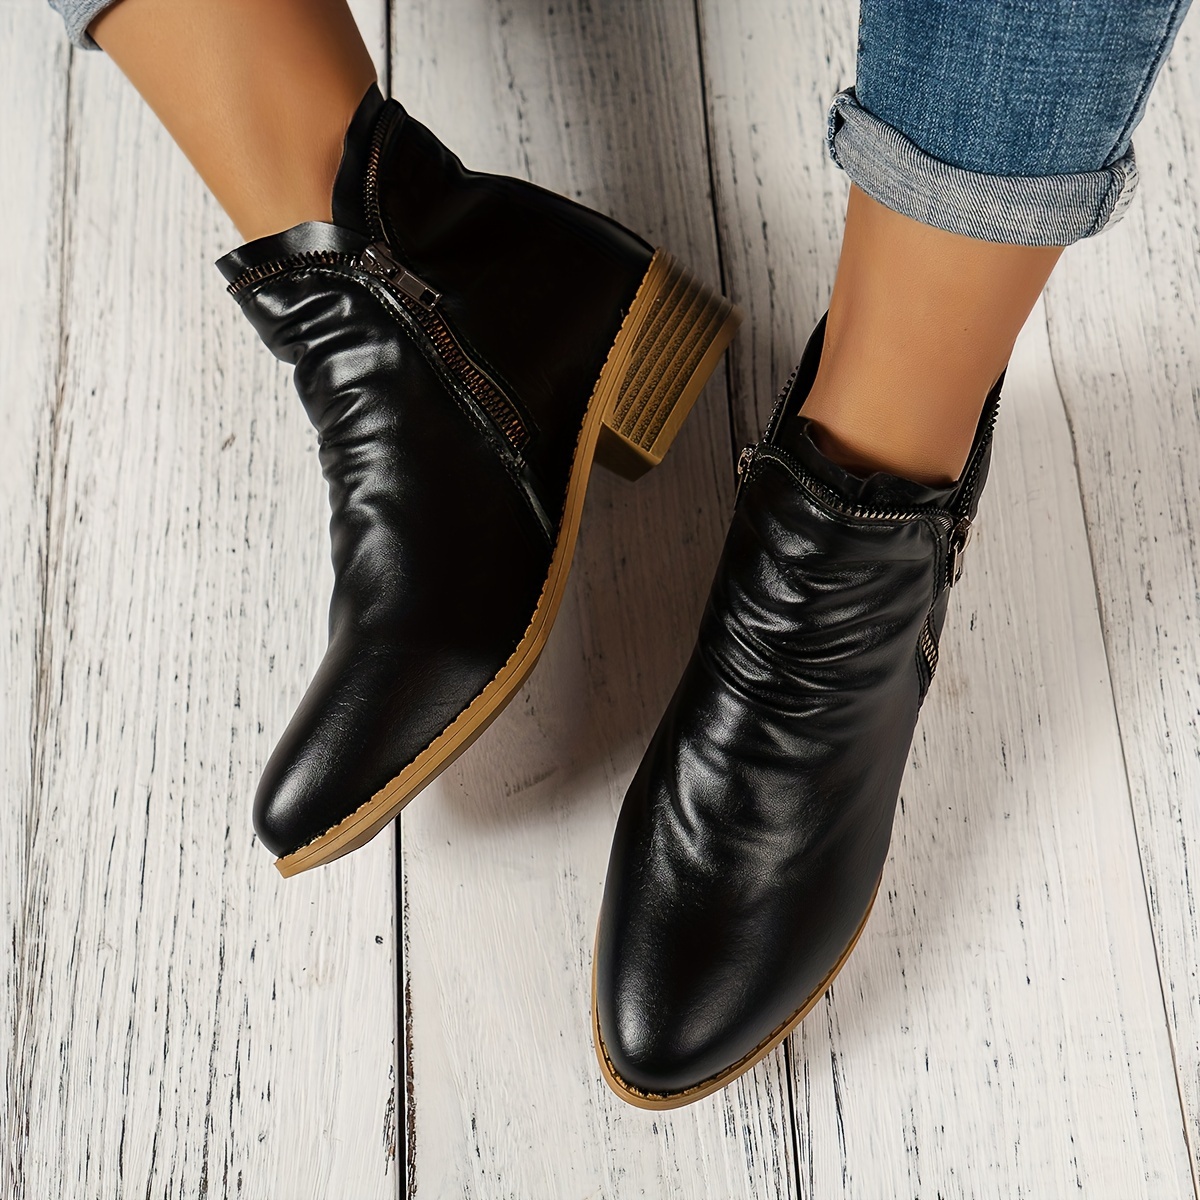 Ruched ankle boots